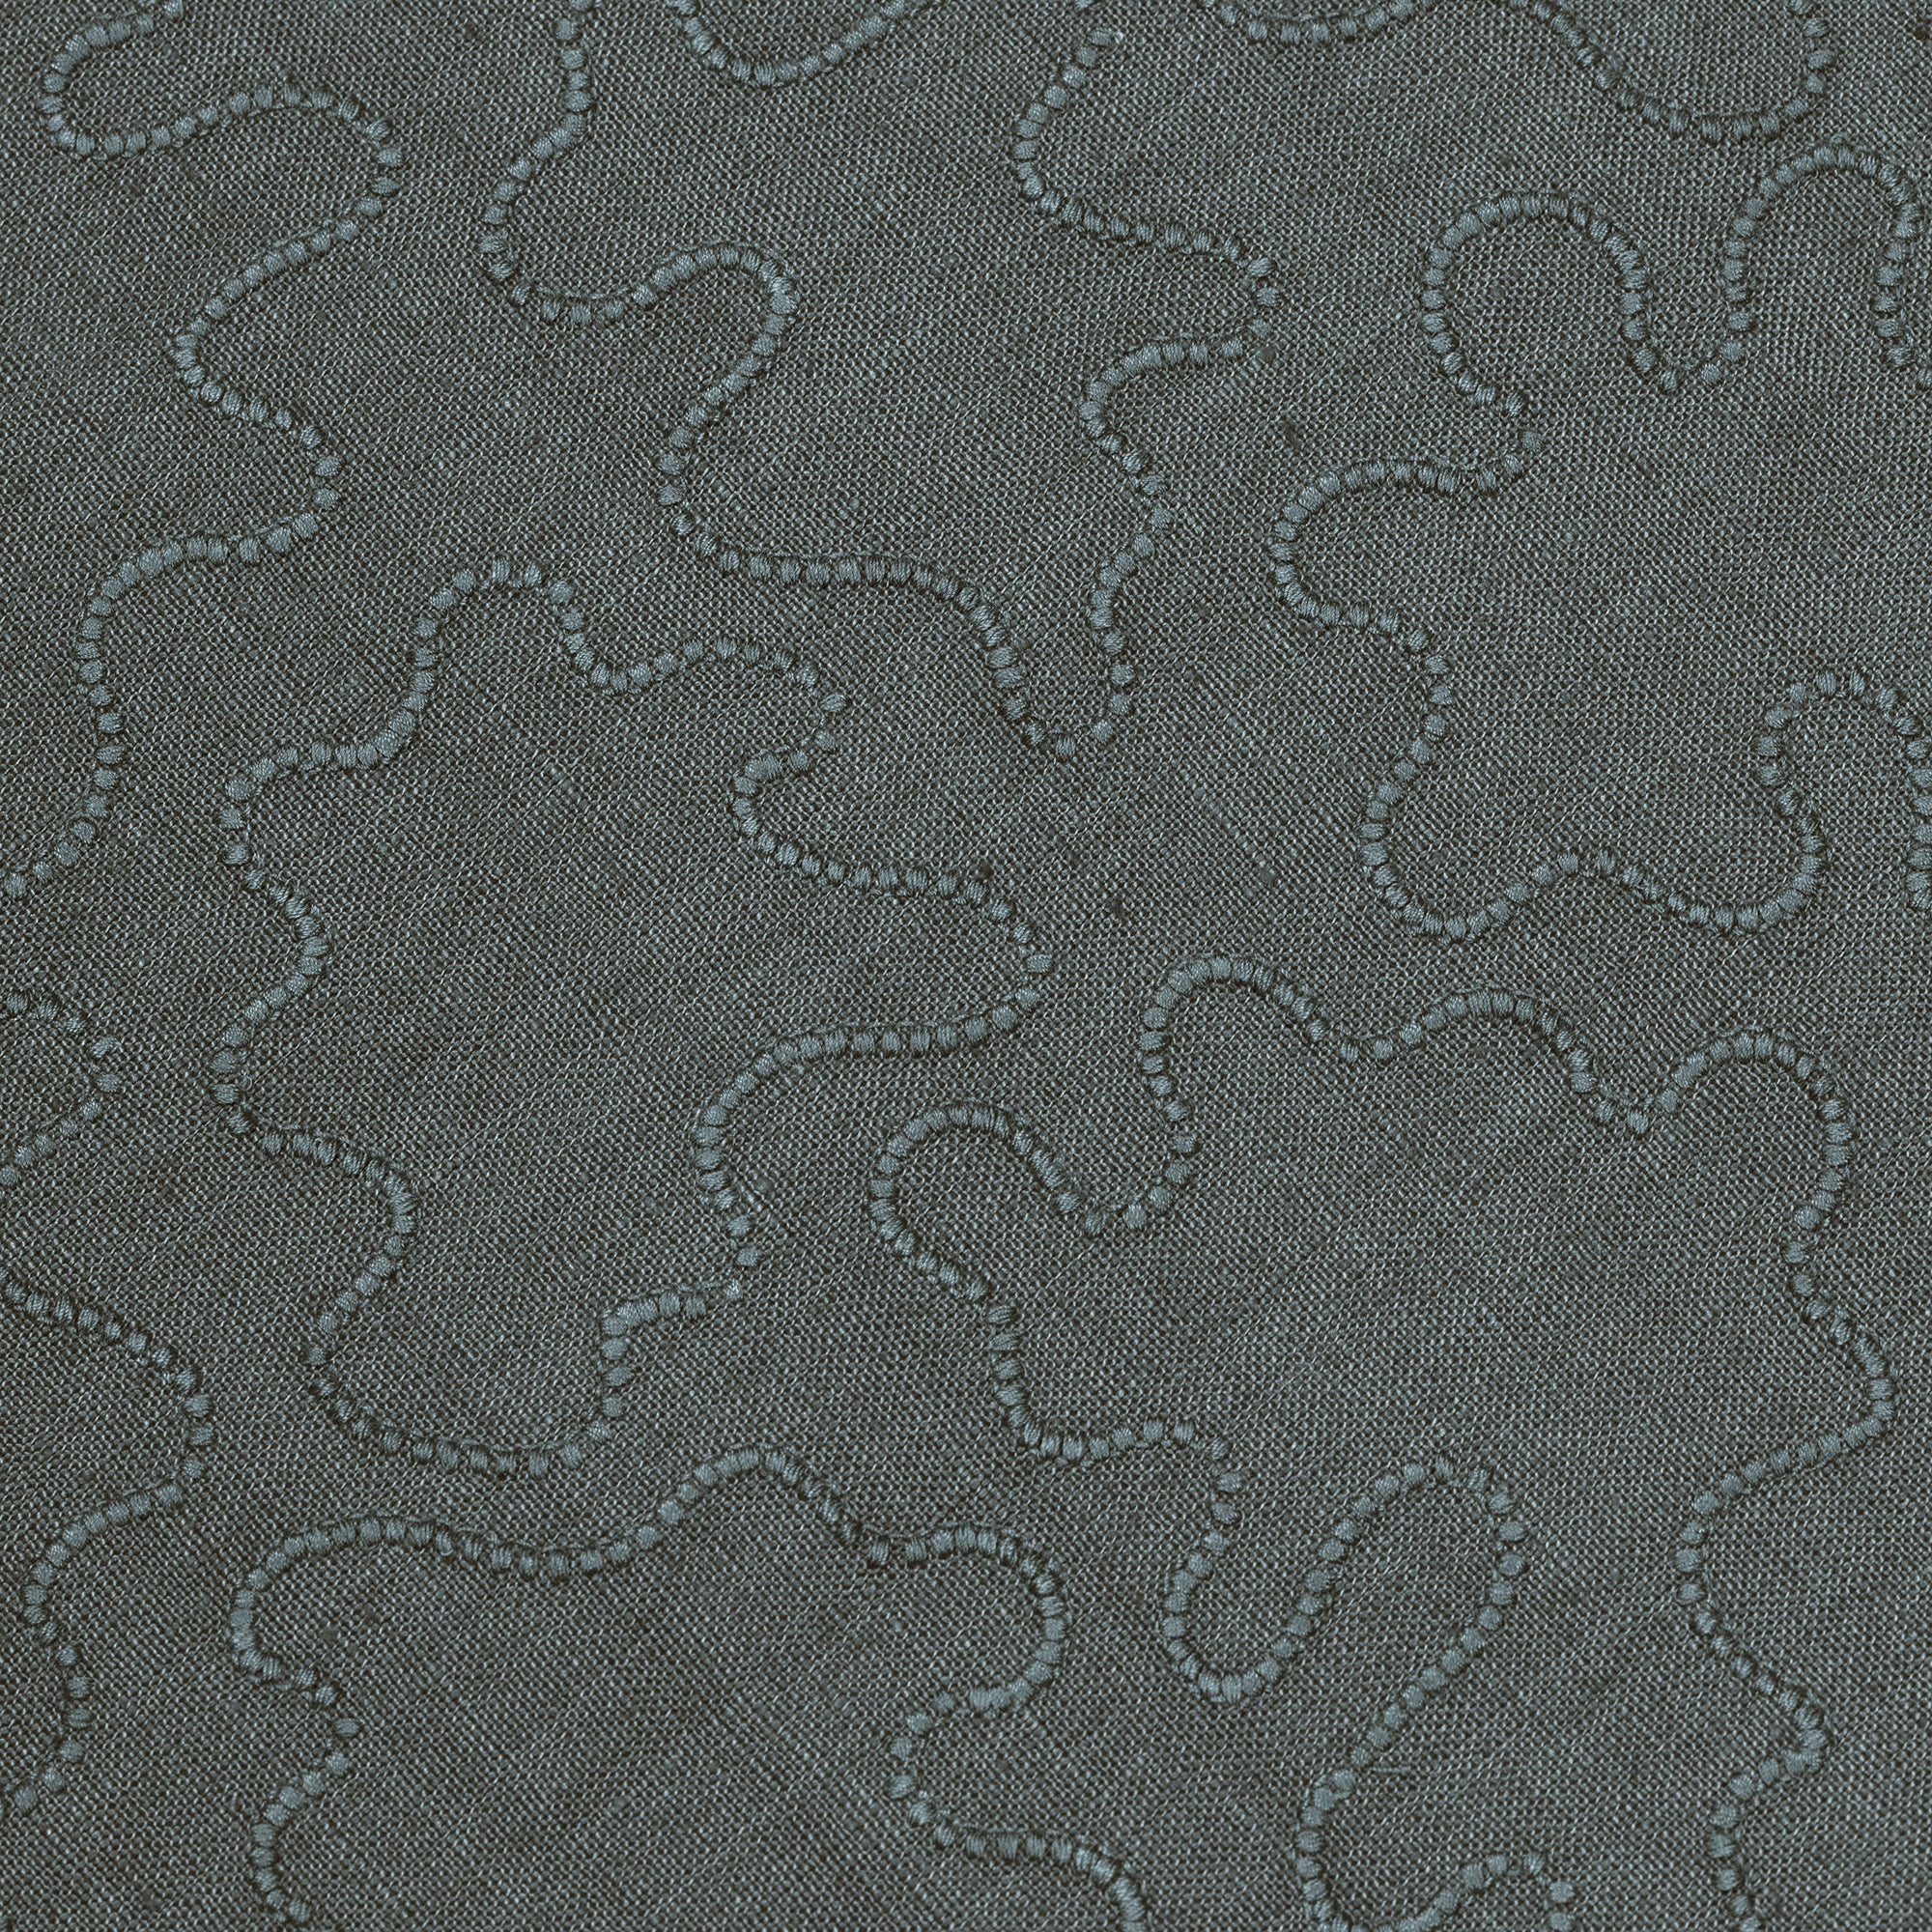 Fabric with an abstract embroidered pattern in gray on a gray field.